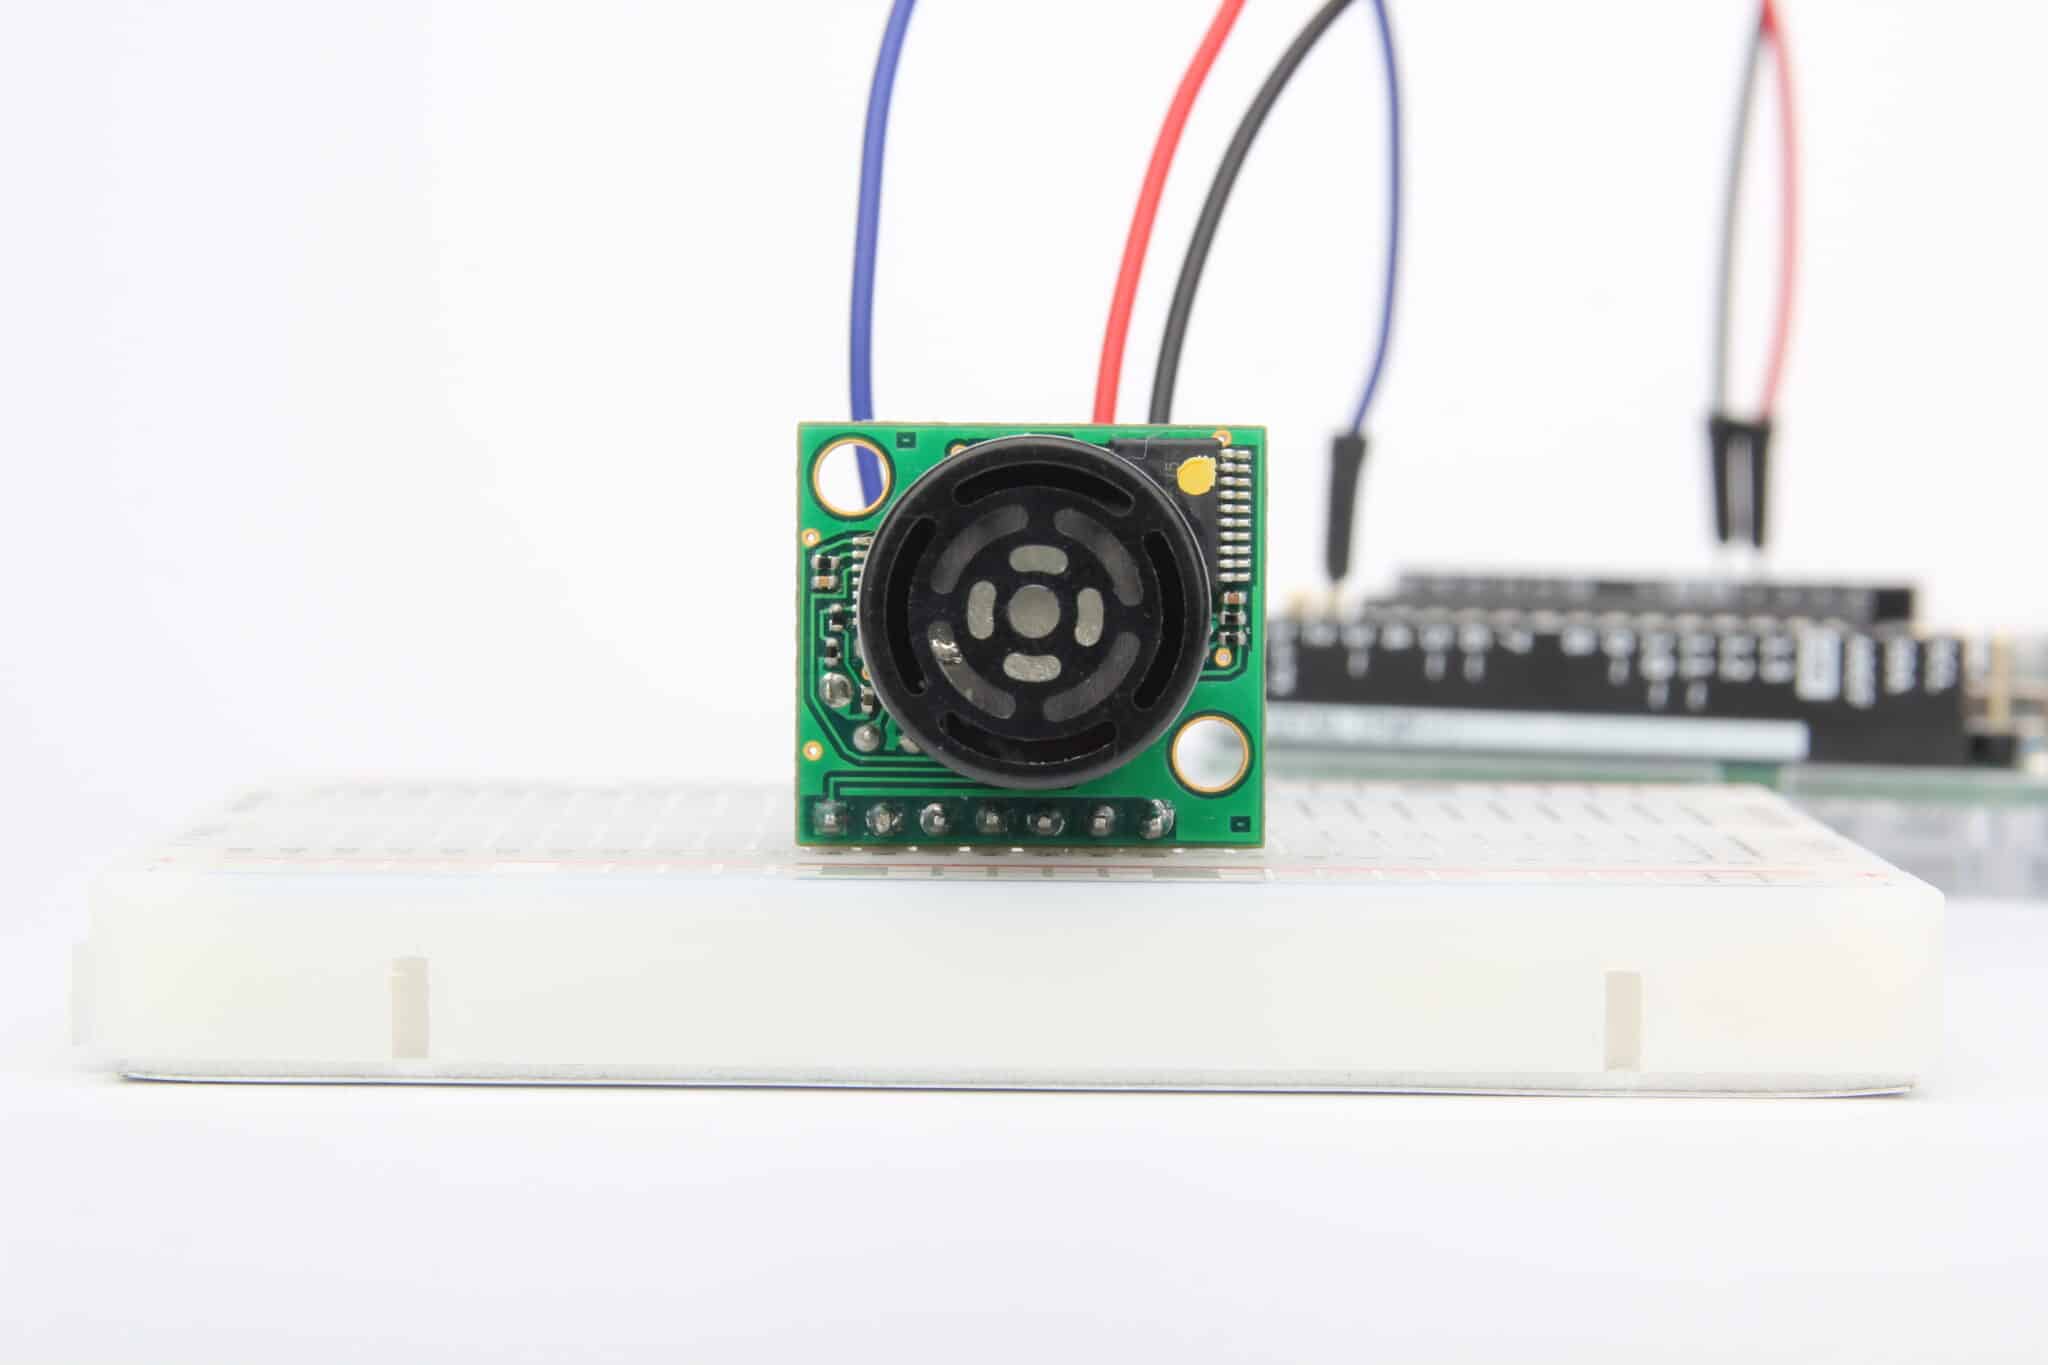 MB1240 Ultrasonic Distance sensor with Arduino Featured Image